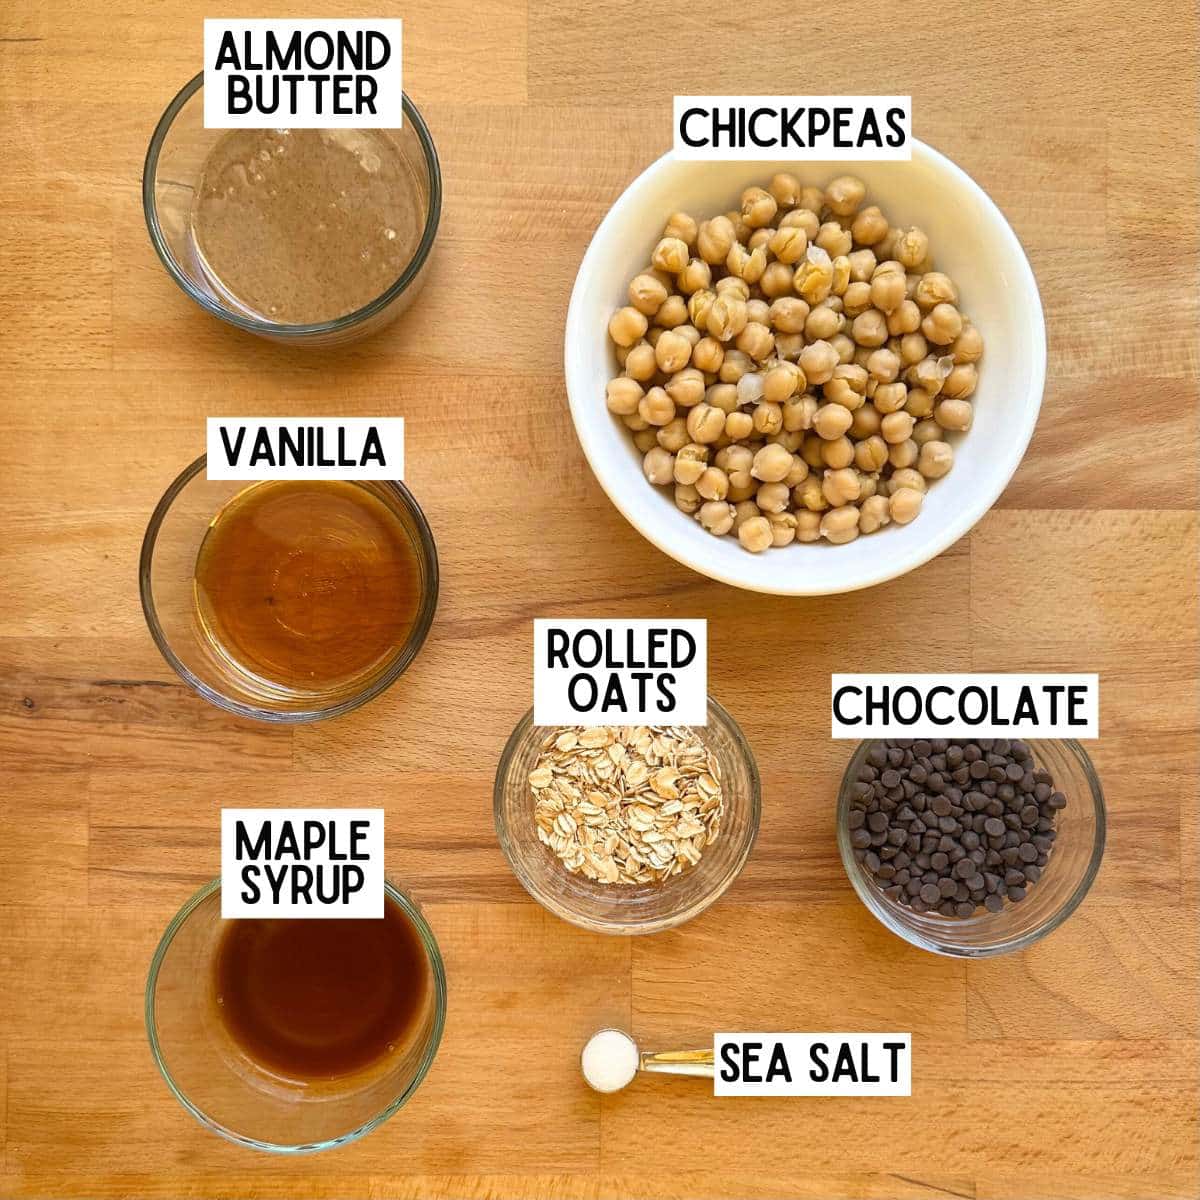 Ingredients to make chickpea cookie dough with corresponding labels: almond butter, chickpeas, vanilla, rolled oats, chocolate, maple syrup, and sea salt.